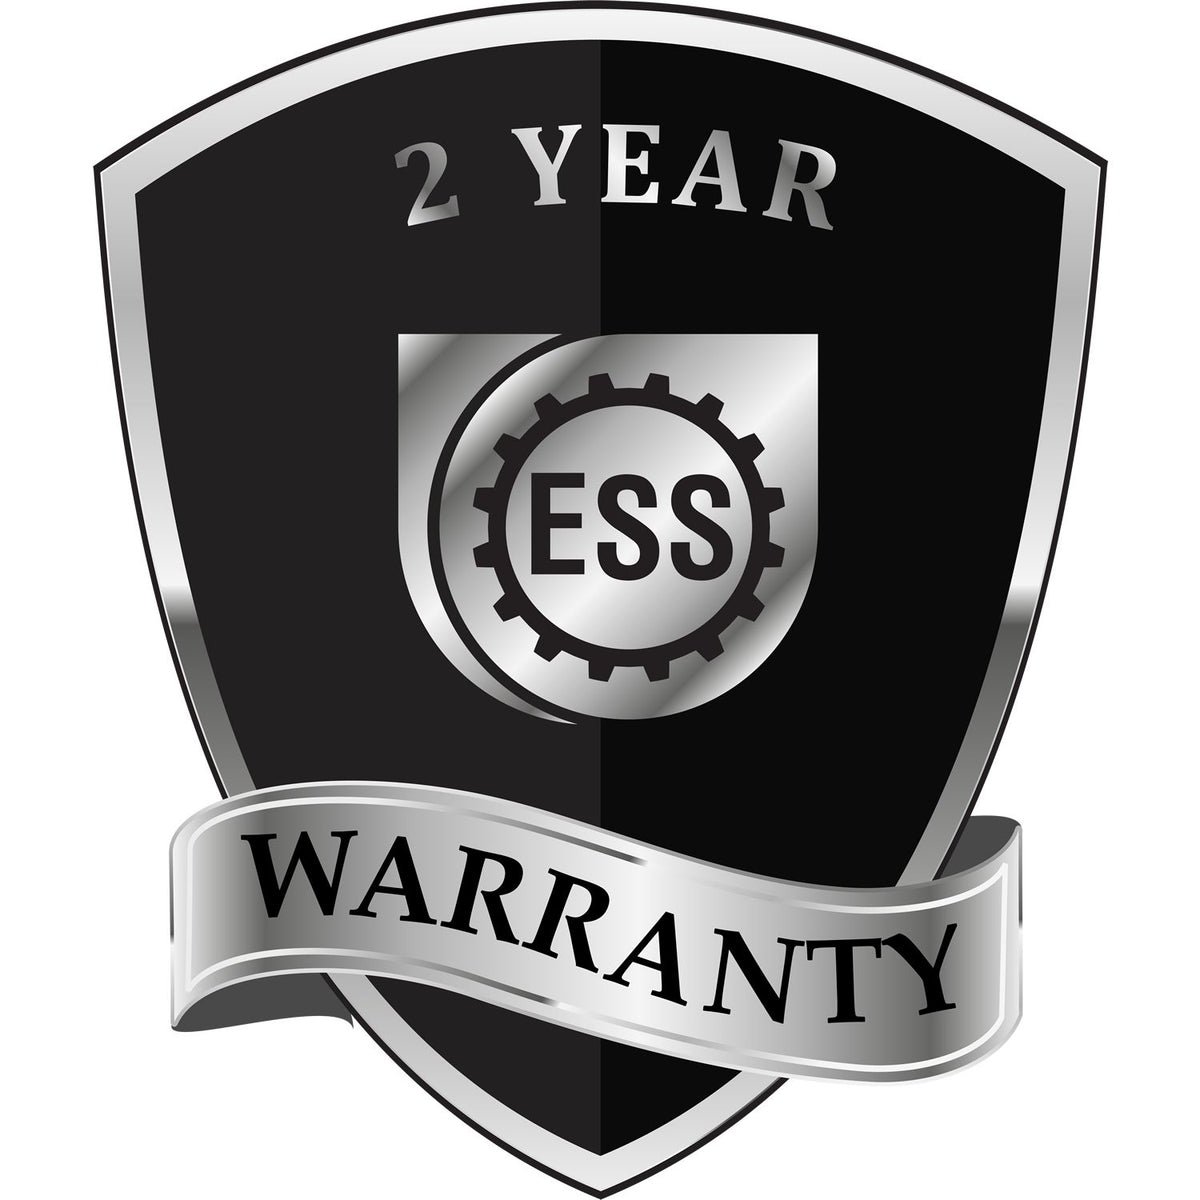 A black and silver badge or emblem showing warranty information for the Gift New Jersey Architect Seal